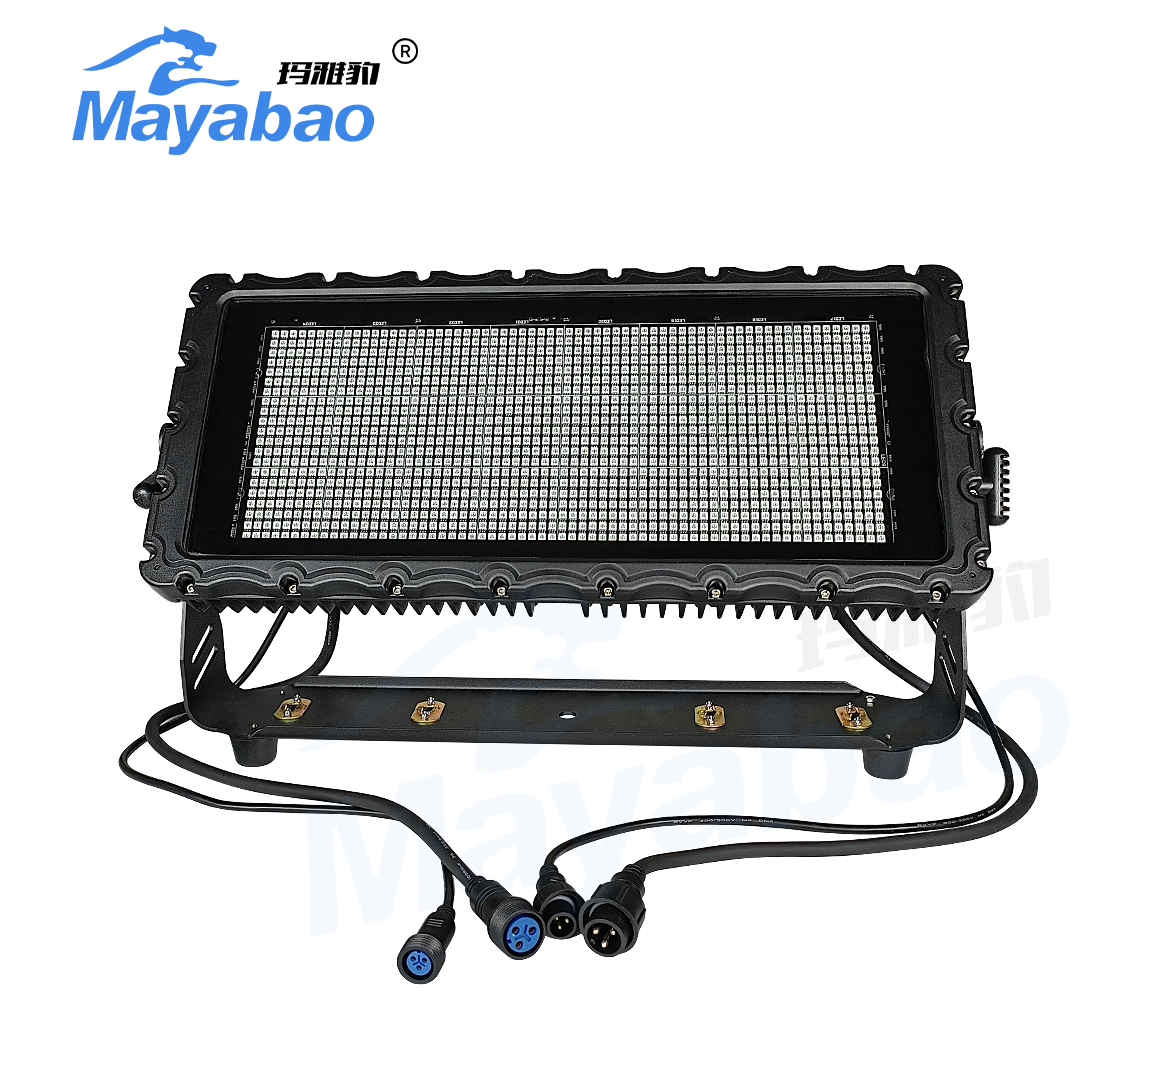 Outdoor IP65 24 Section RGB 3 in 1 Strobe Light